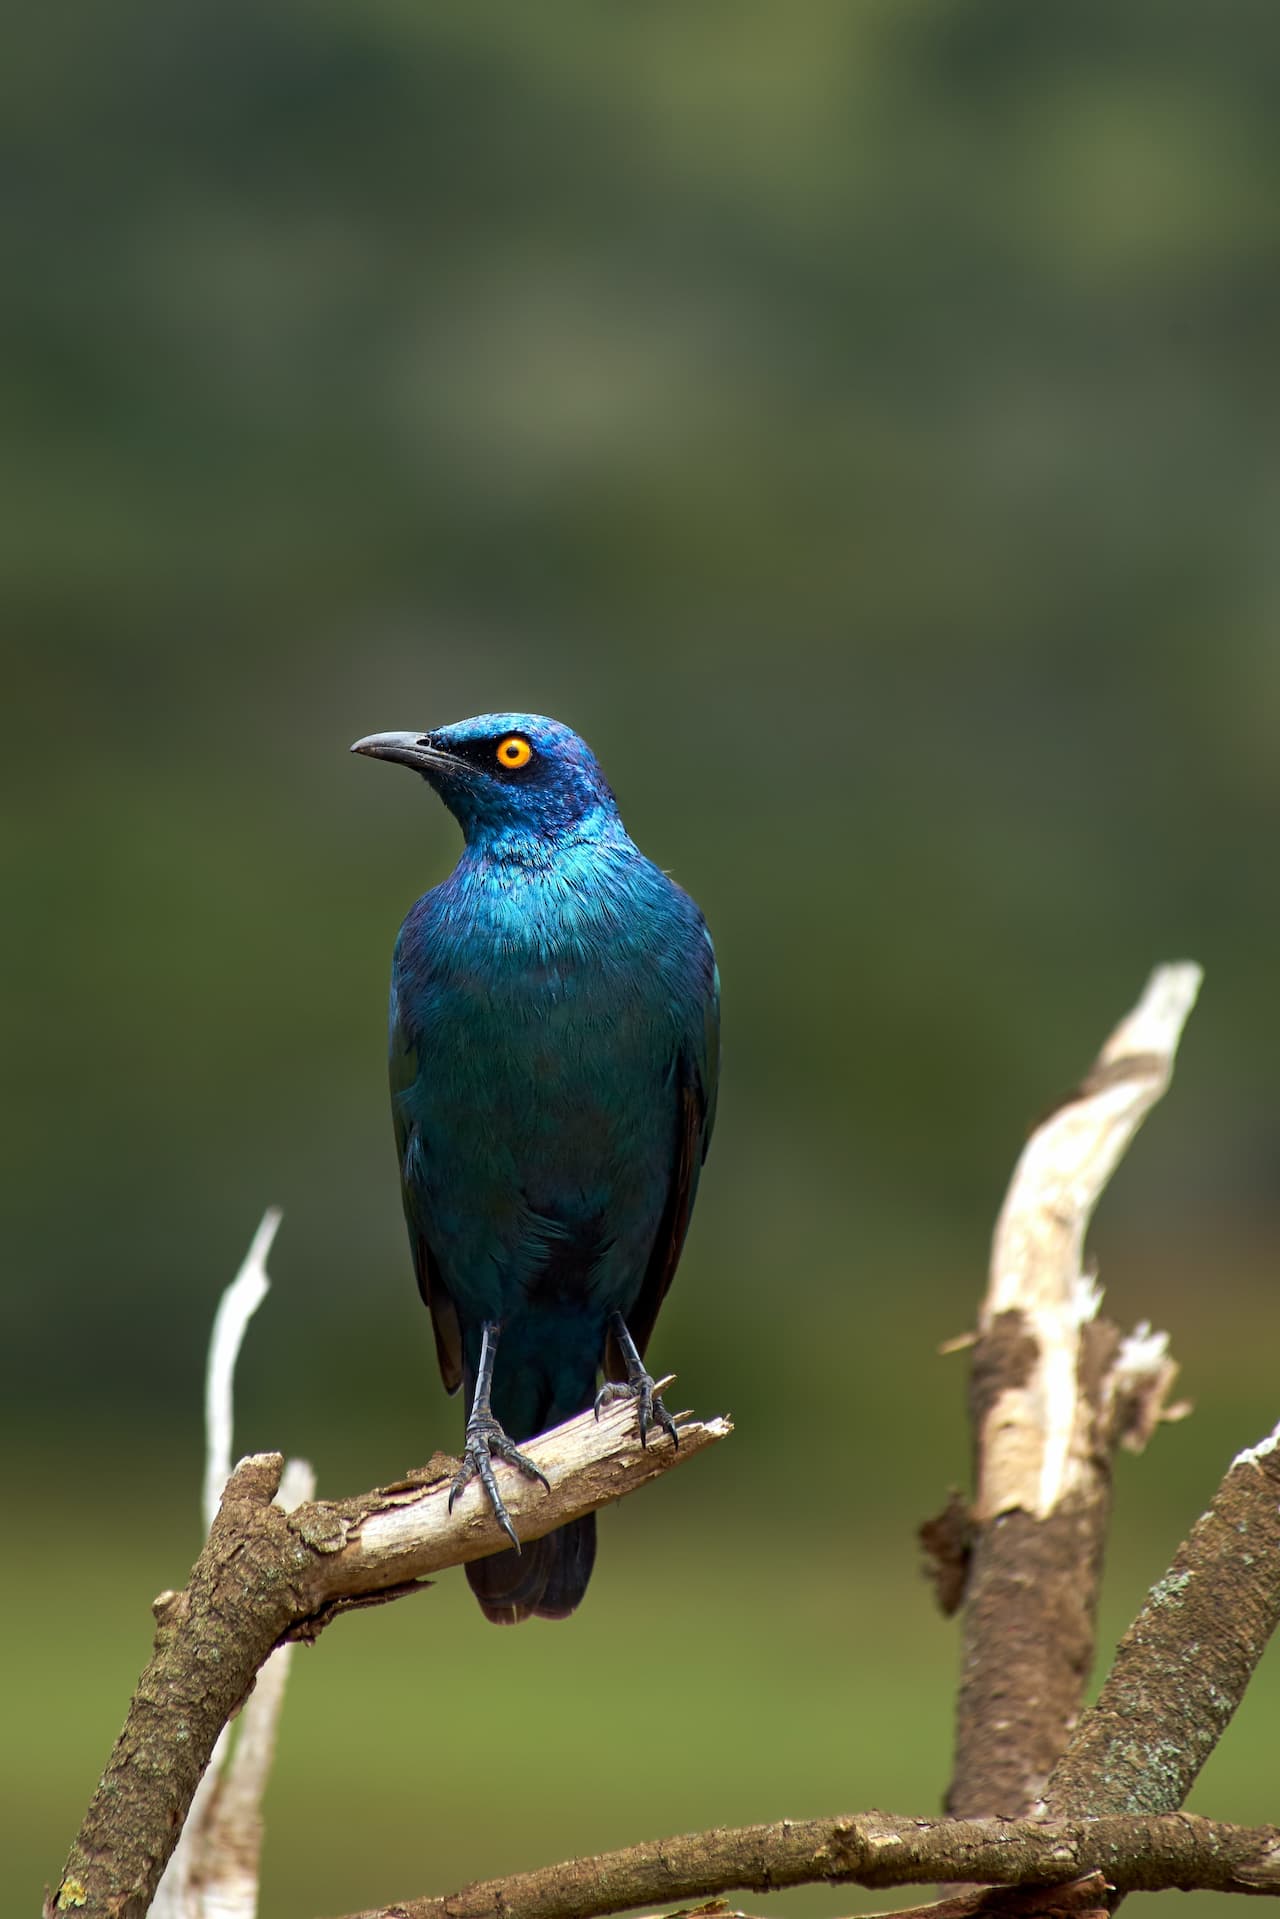 The Red-shouldered Glossy Starlings Is Perched On A Tree